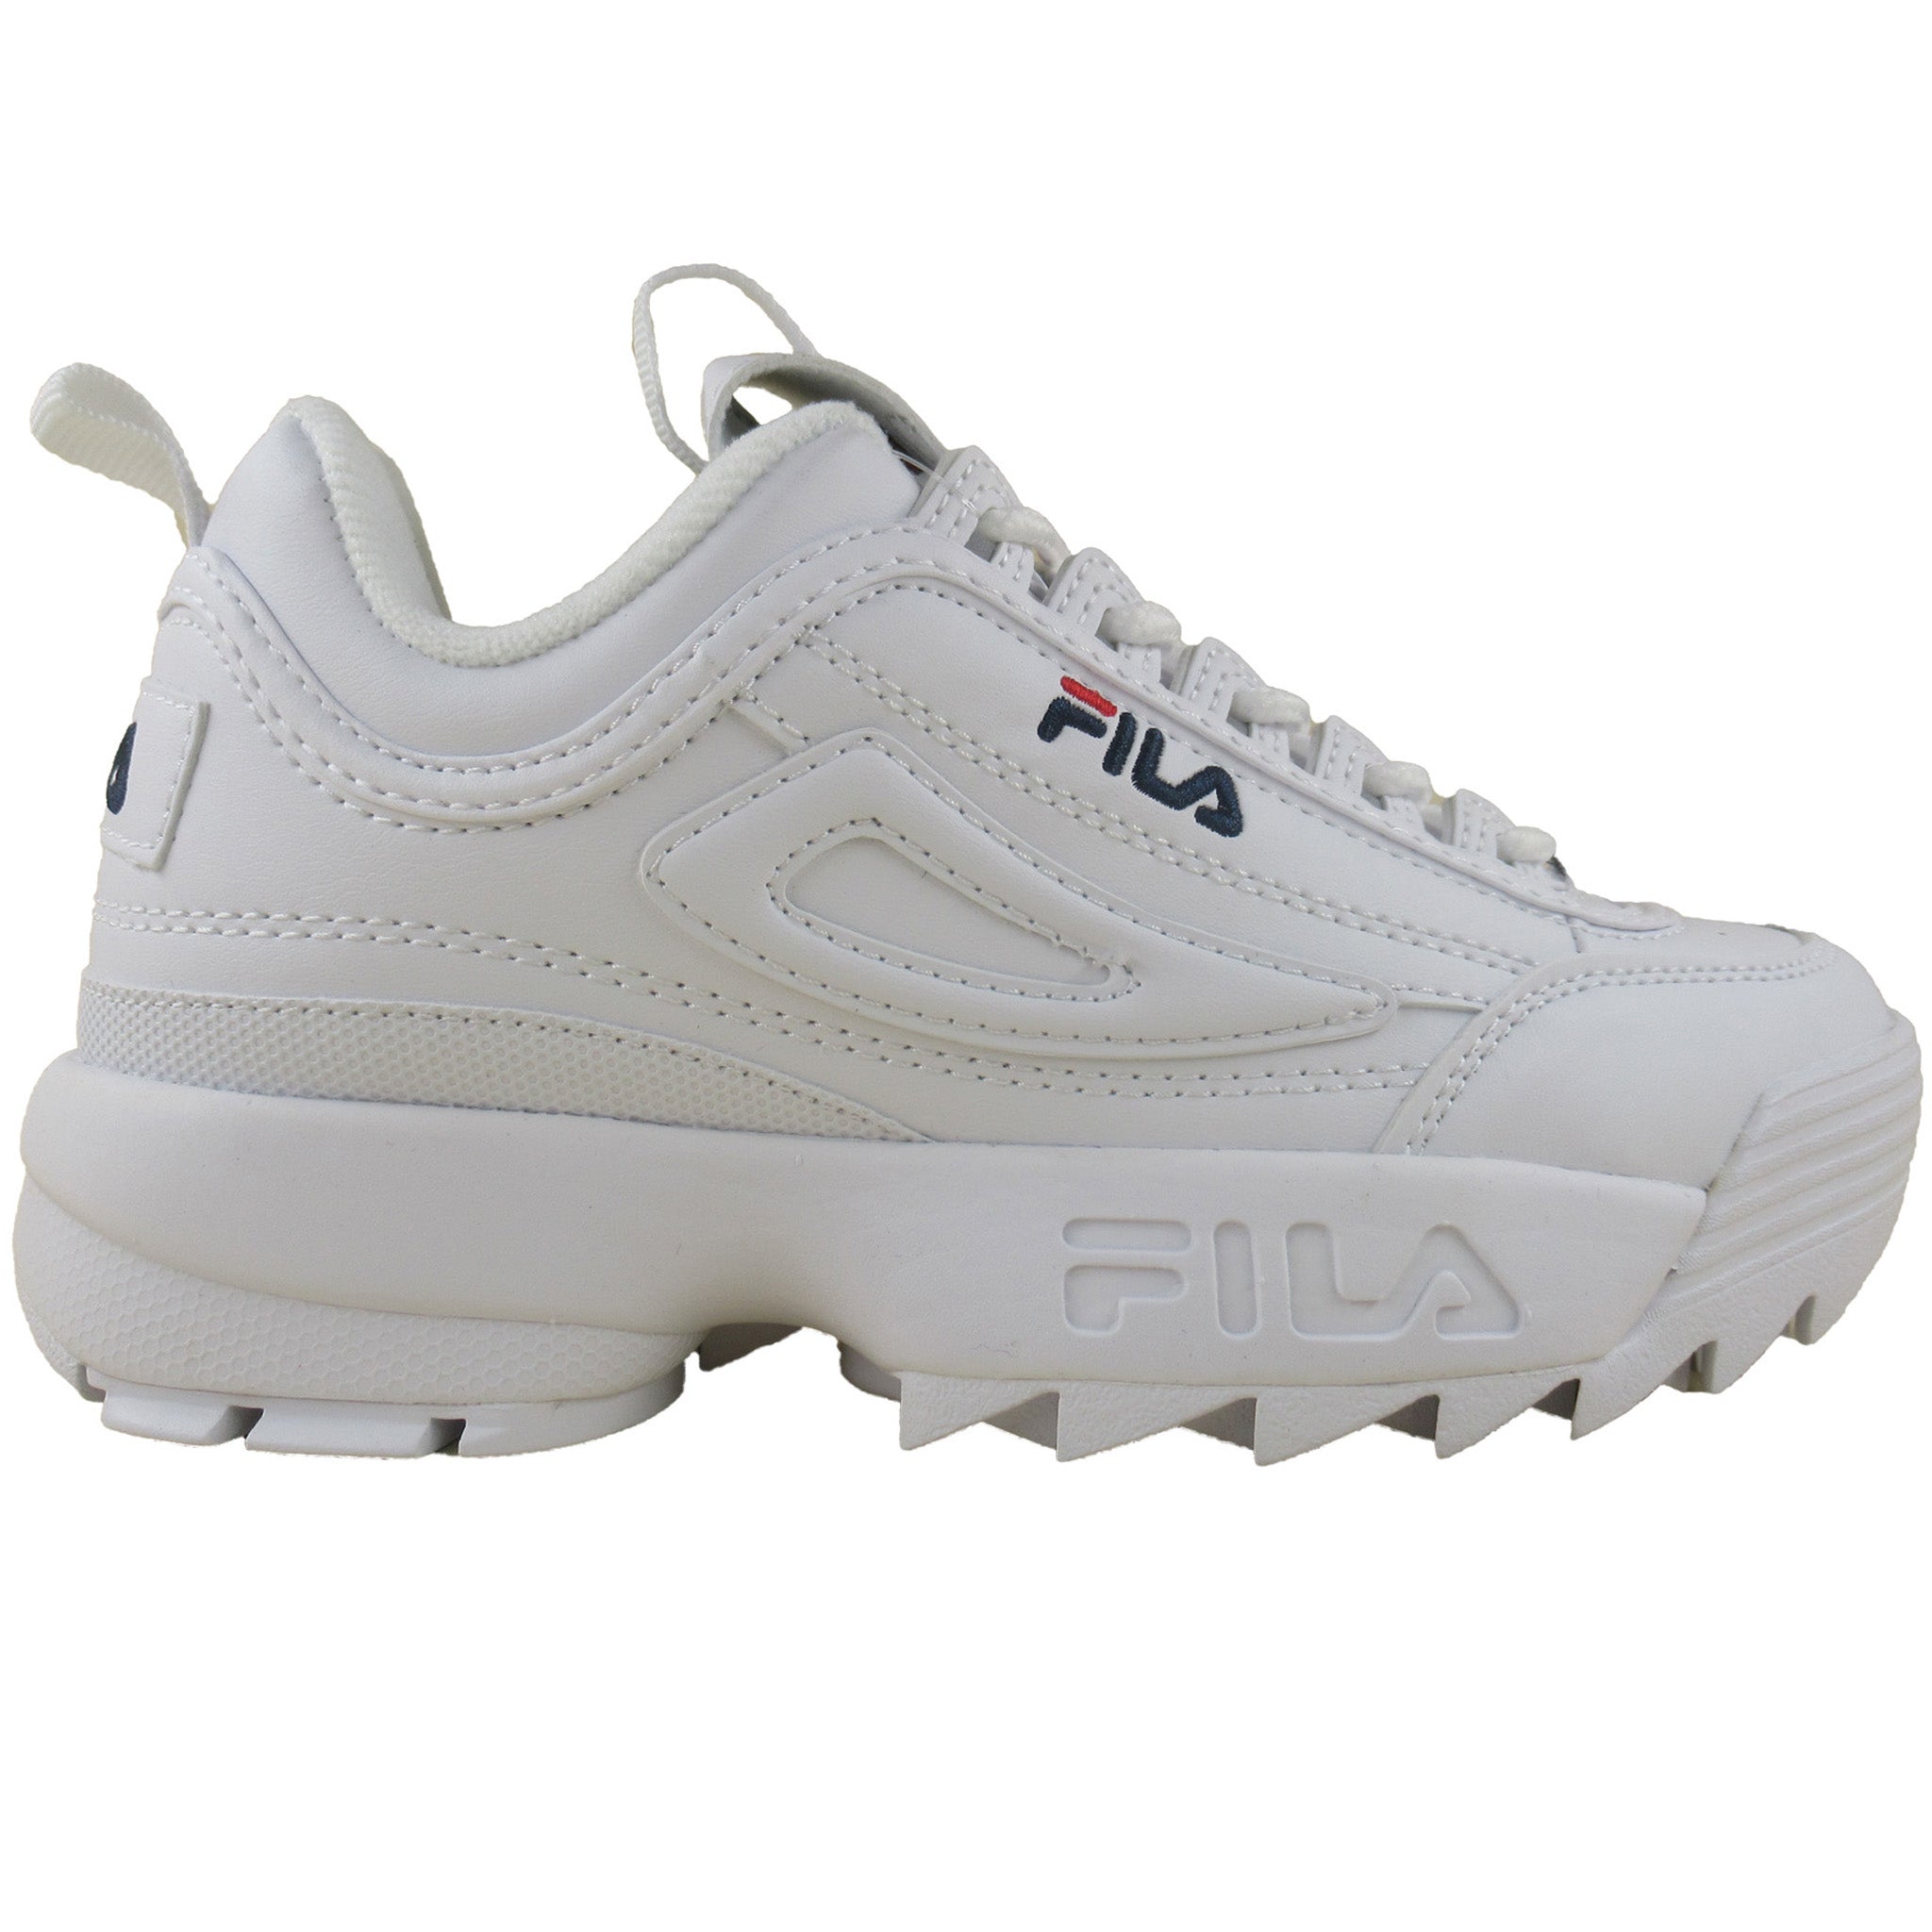 FILA II Girls Shoes Size 6 Color White/navy for sale online | eBay